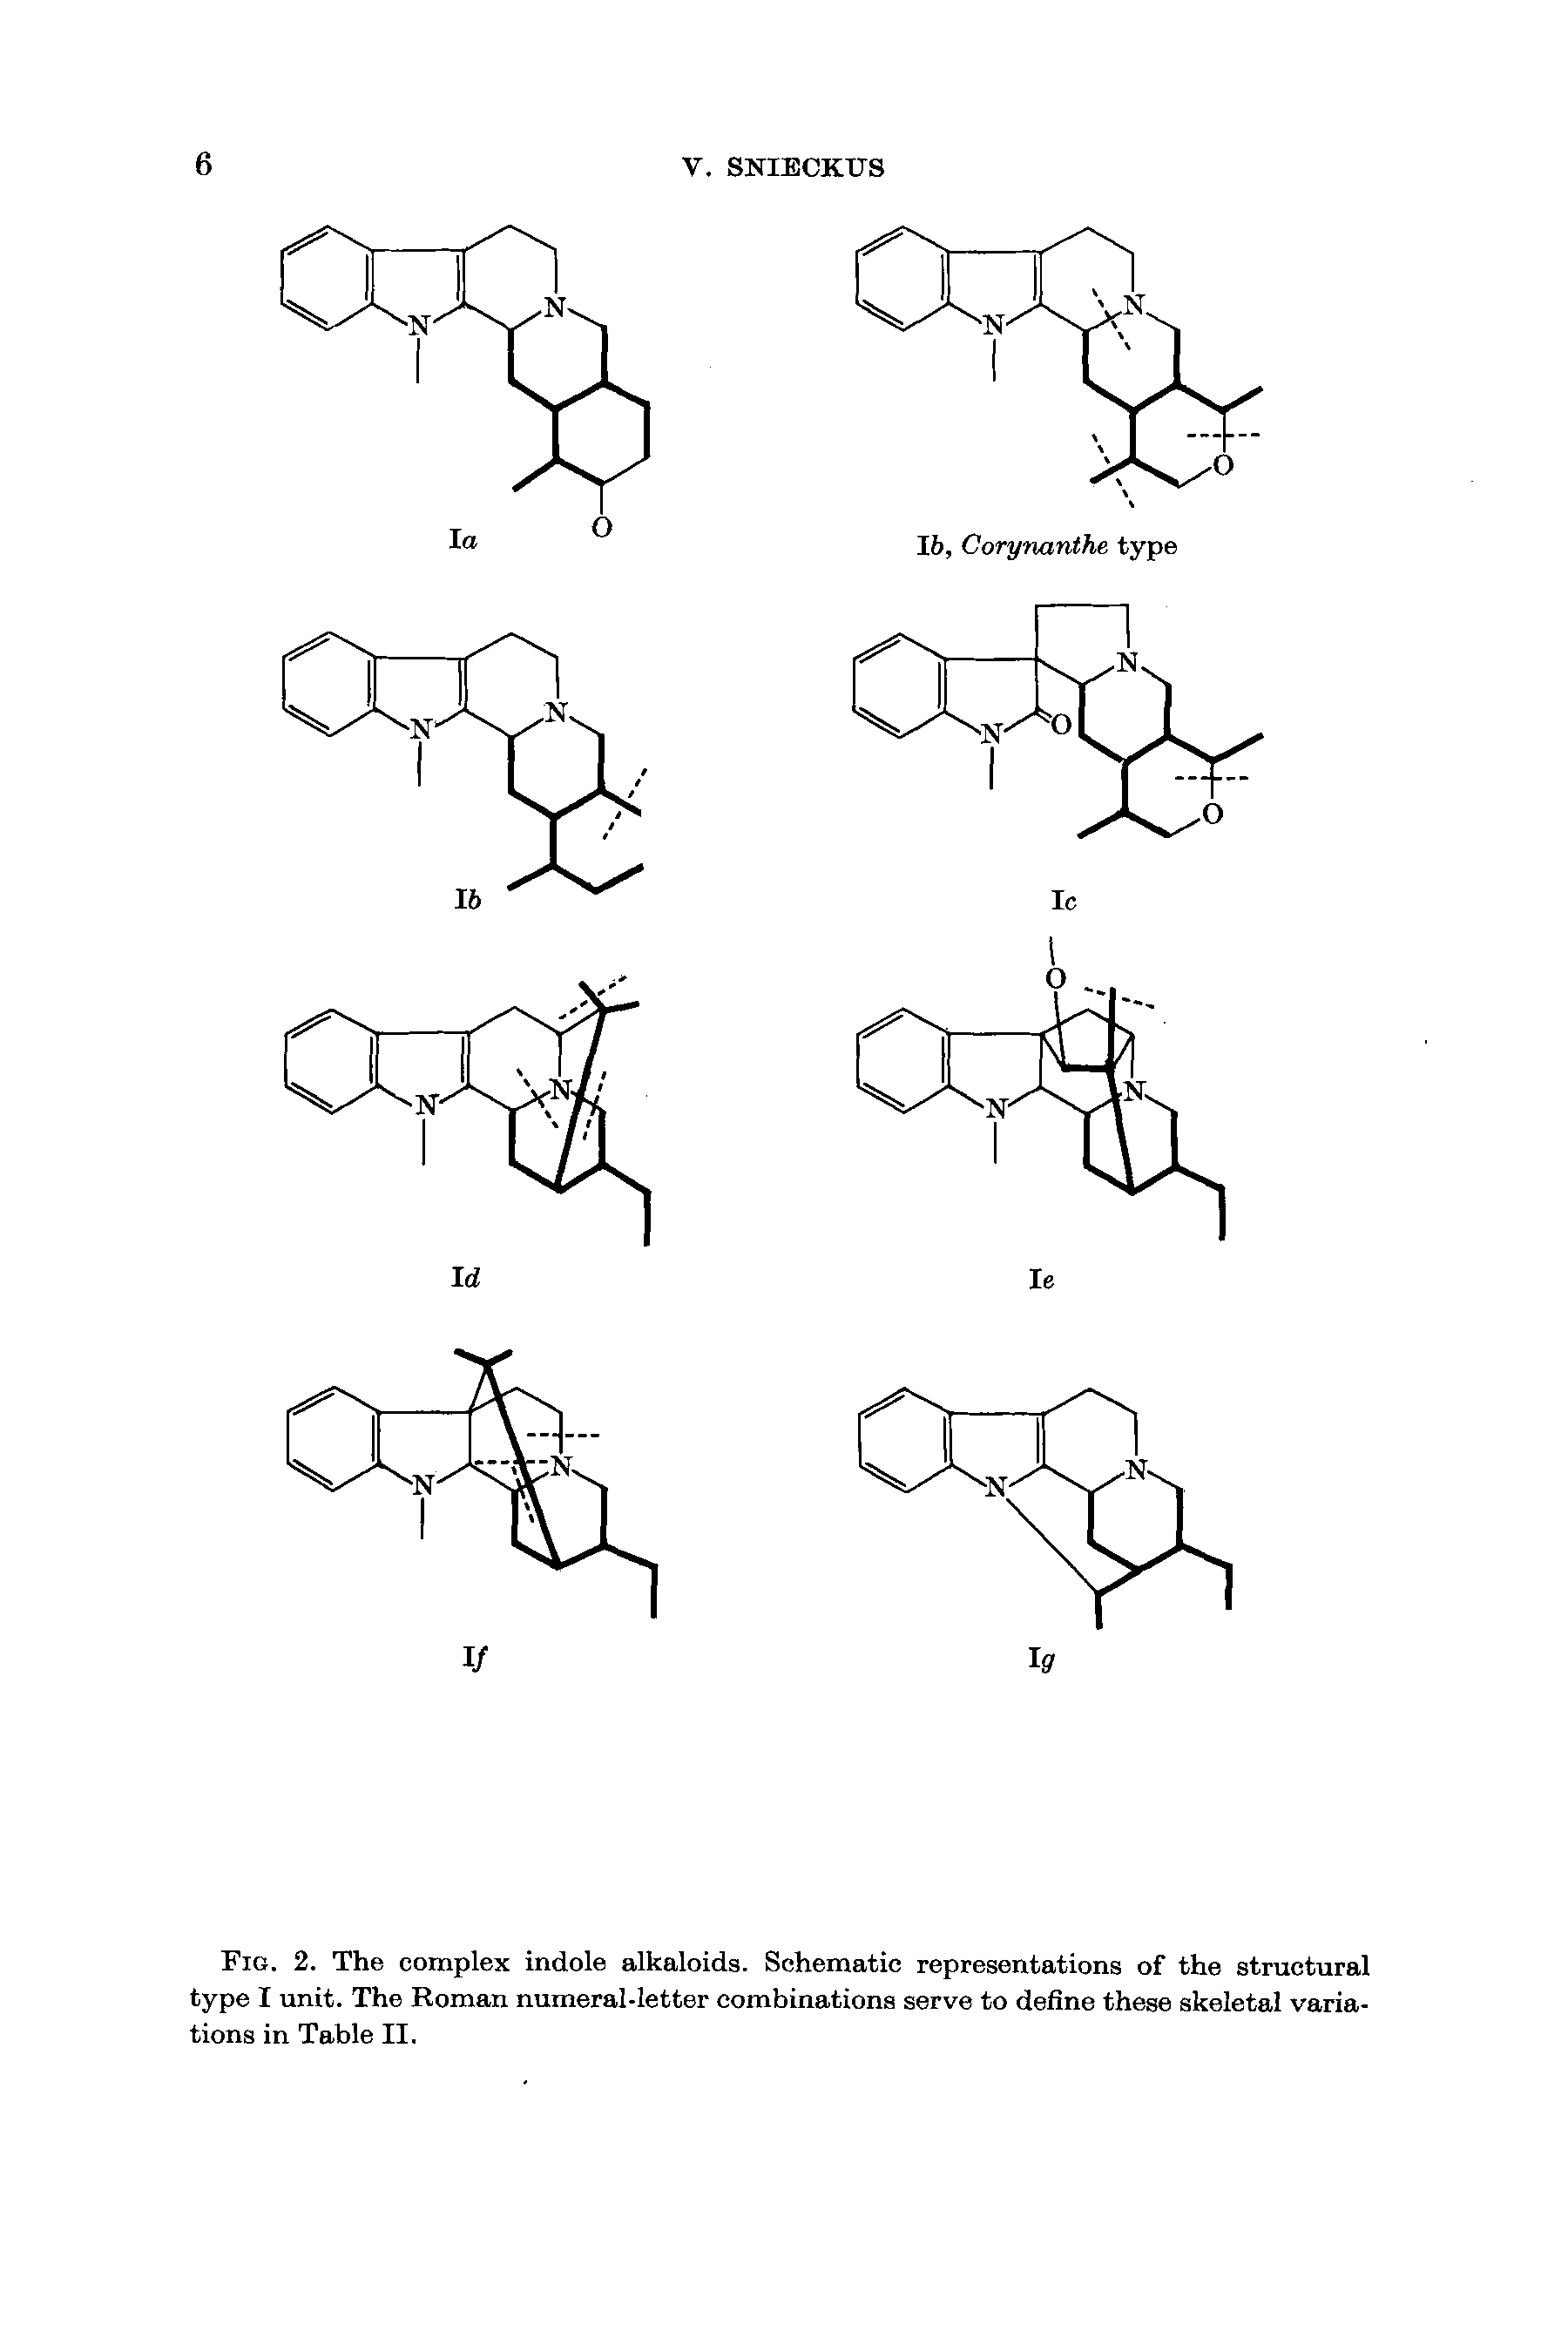 Fig. 2. The complex indole alkaloids. Schematic representations of the structural type I unit. The Roman numeral-letter combinations serve to define these skeletal variations in Table II.